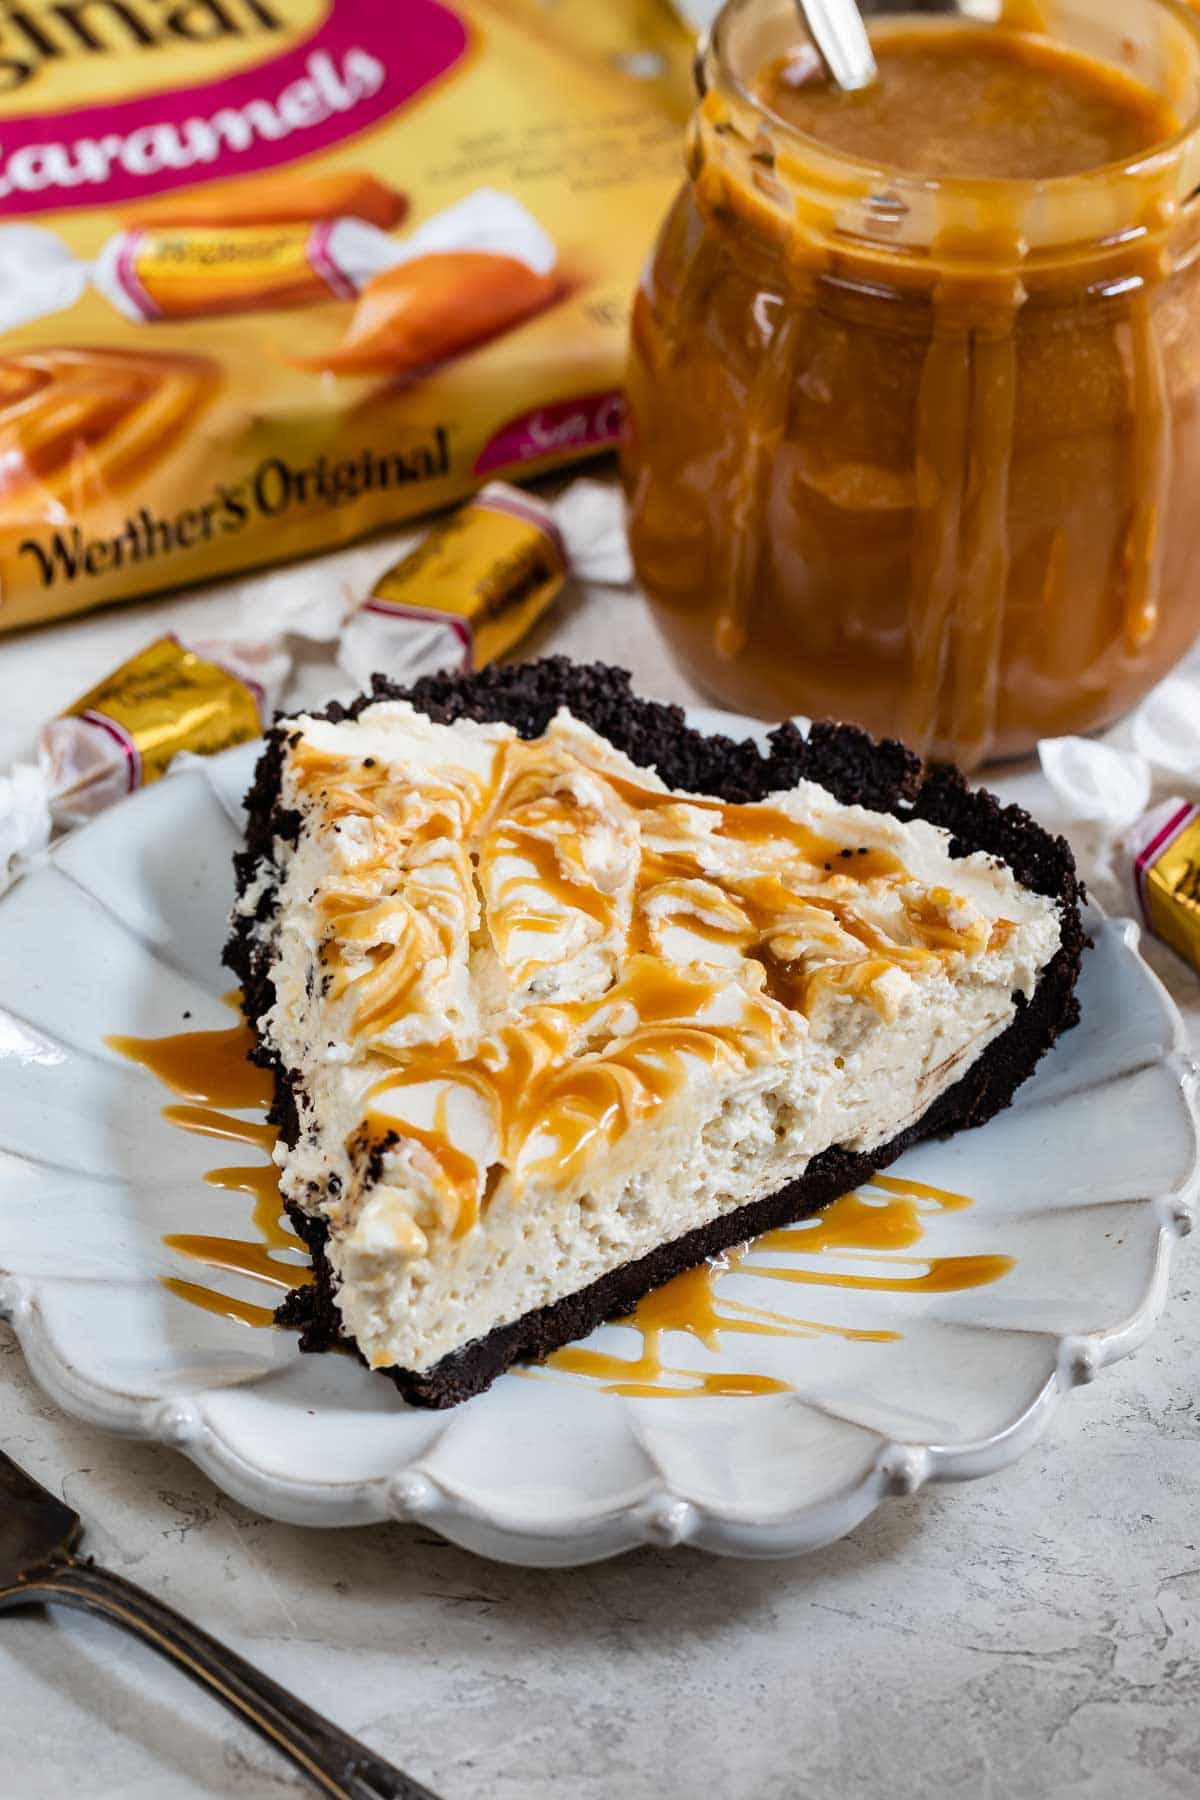 One slice of caramel cheesecake pie on a plate with caramel sauce and candies in the background